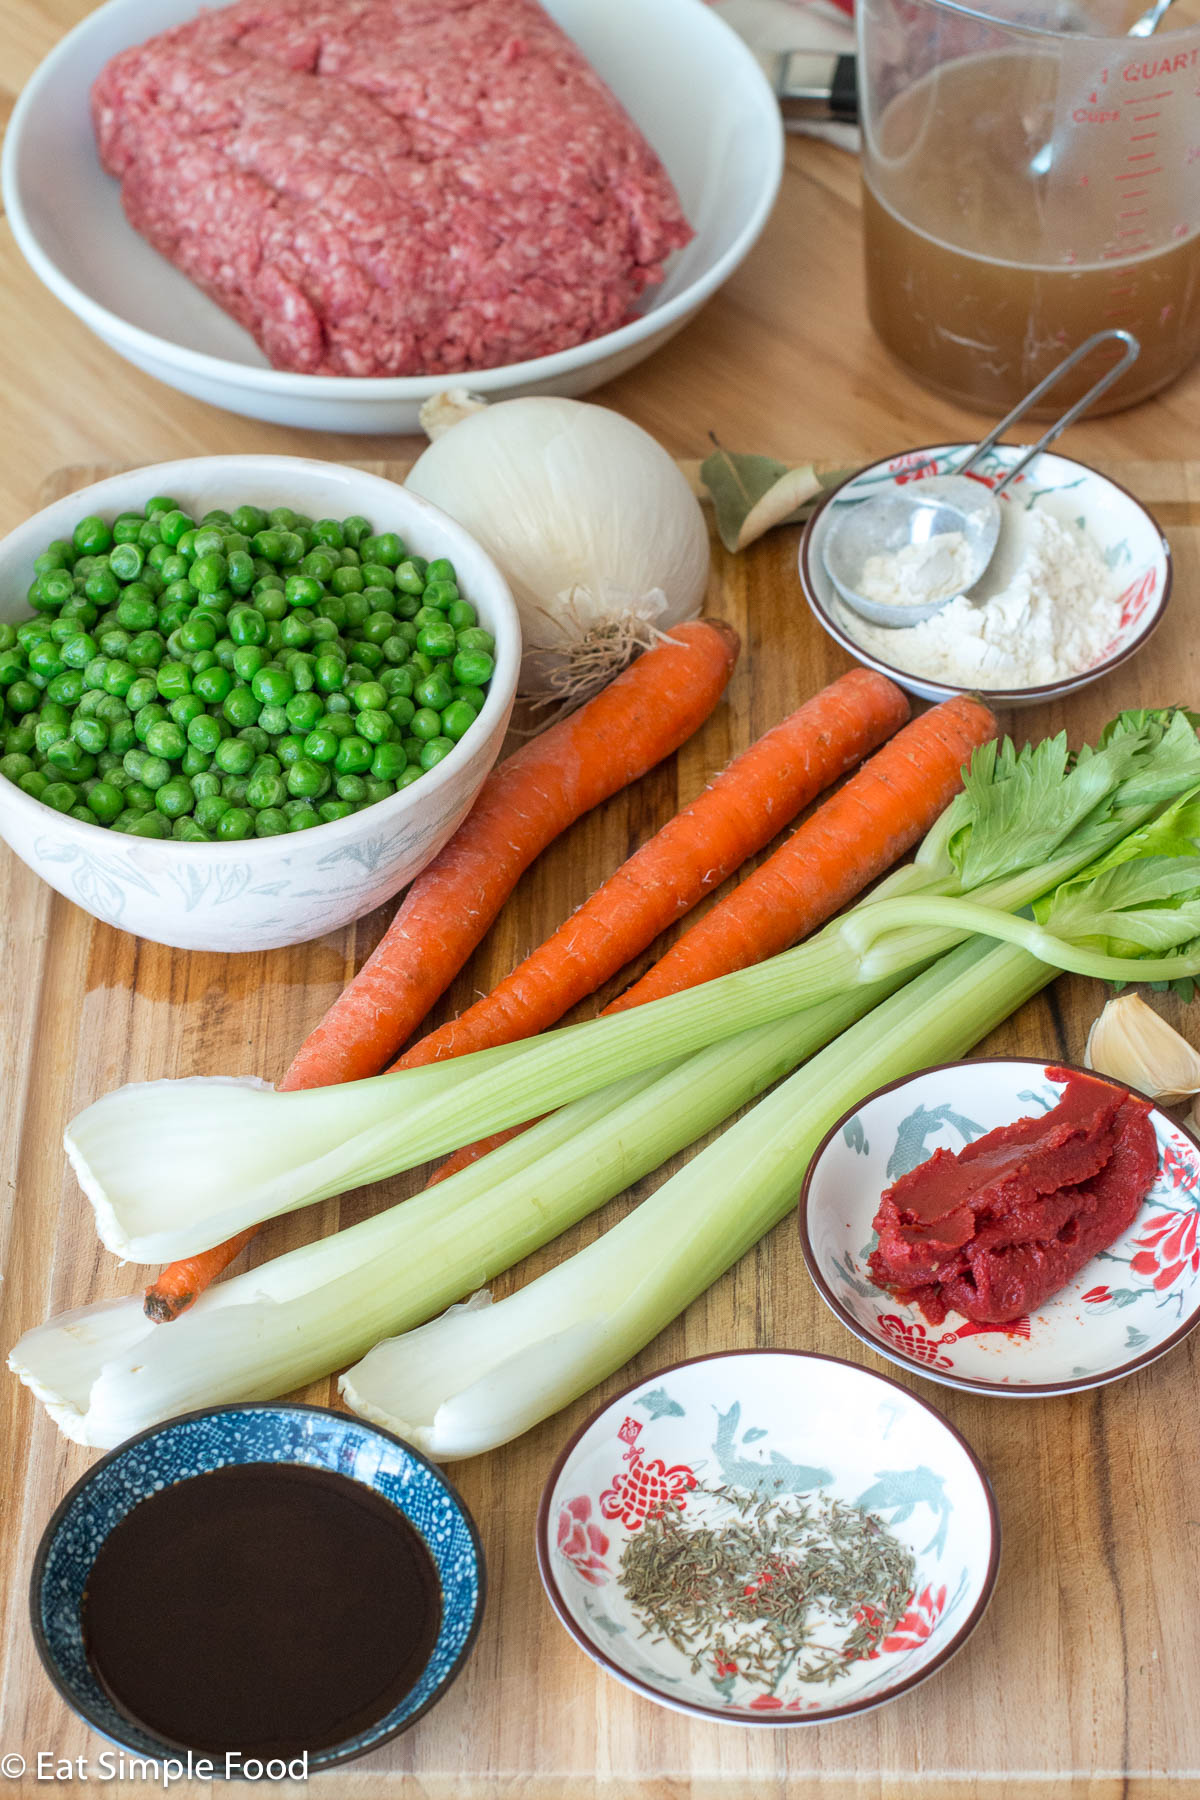 Ingredients on a wood cutting board: 3 carrots, 3 celery stalks, bowl of green peas, white onion, garlic cloves, tomato paste, herbs and a plate of raw ground beef in the background.